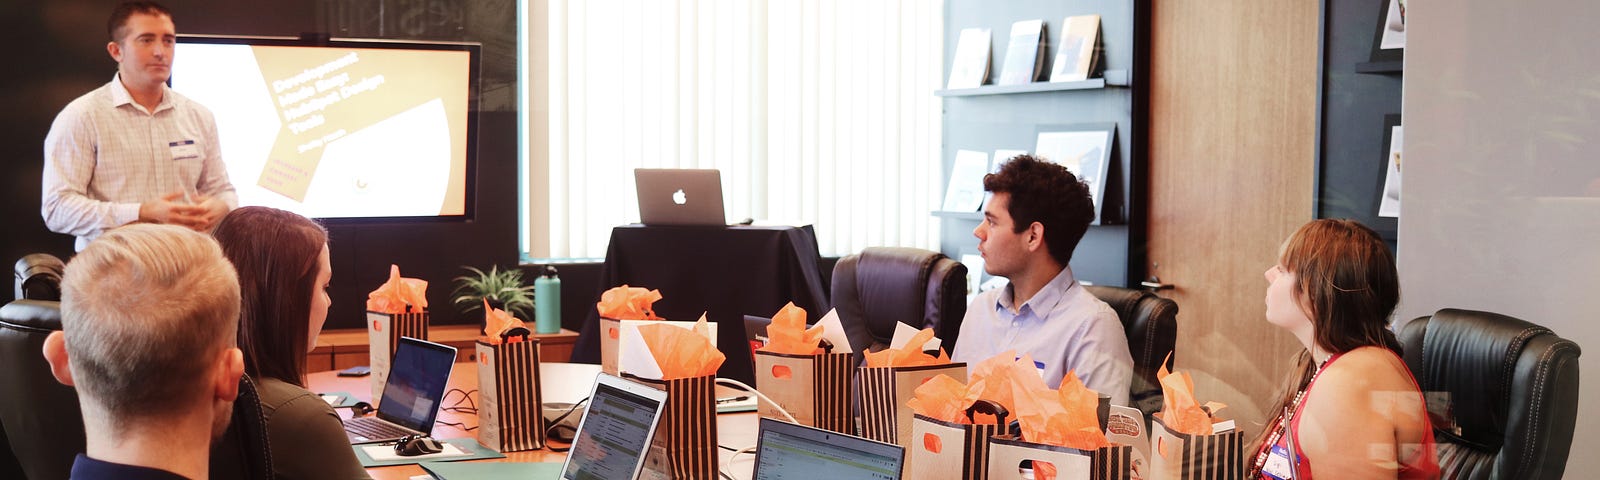 Team of 5 people sitting in an office board room with laptops, doing training with a presenter.